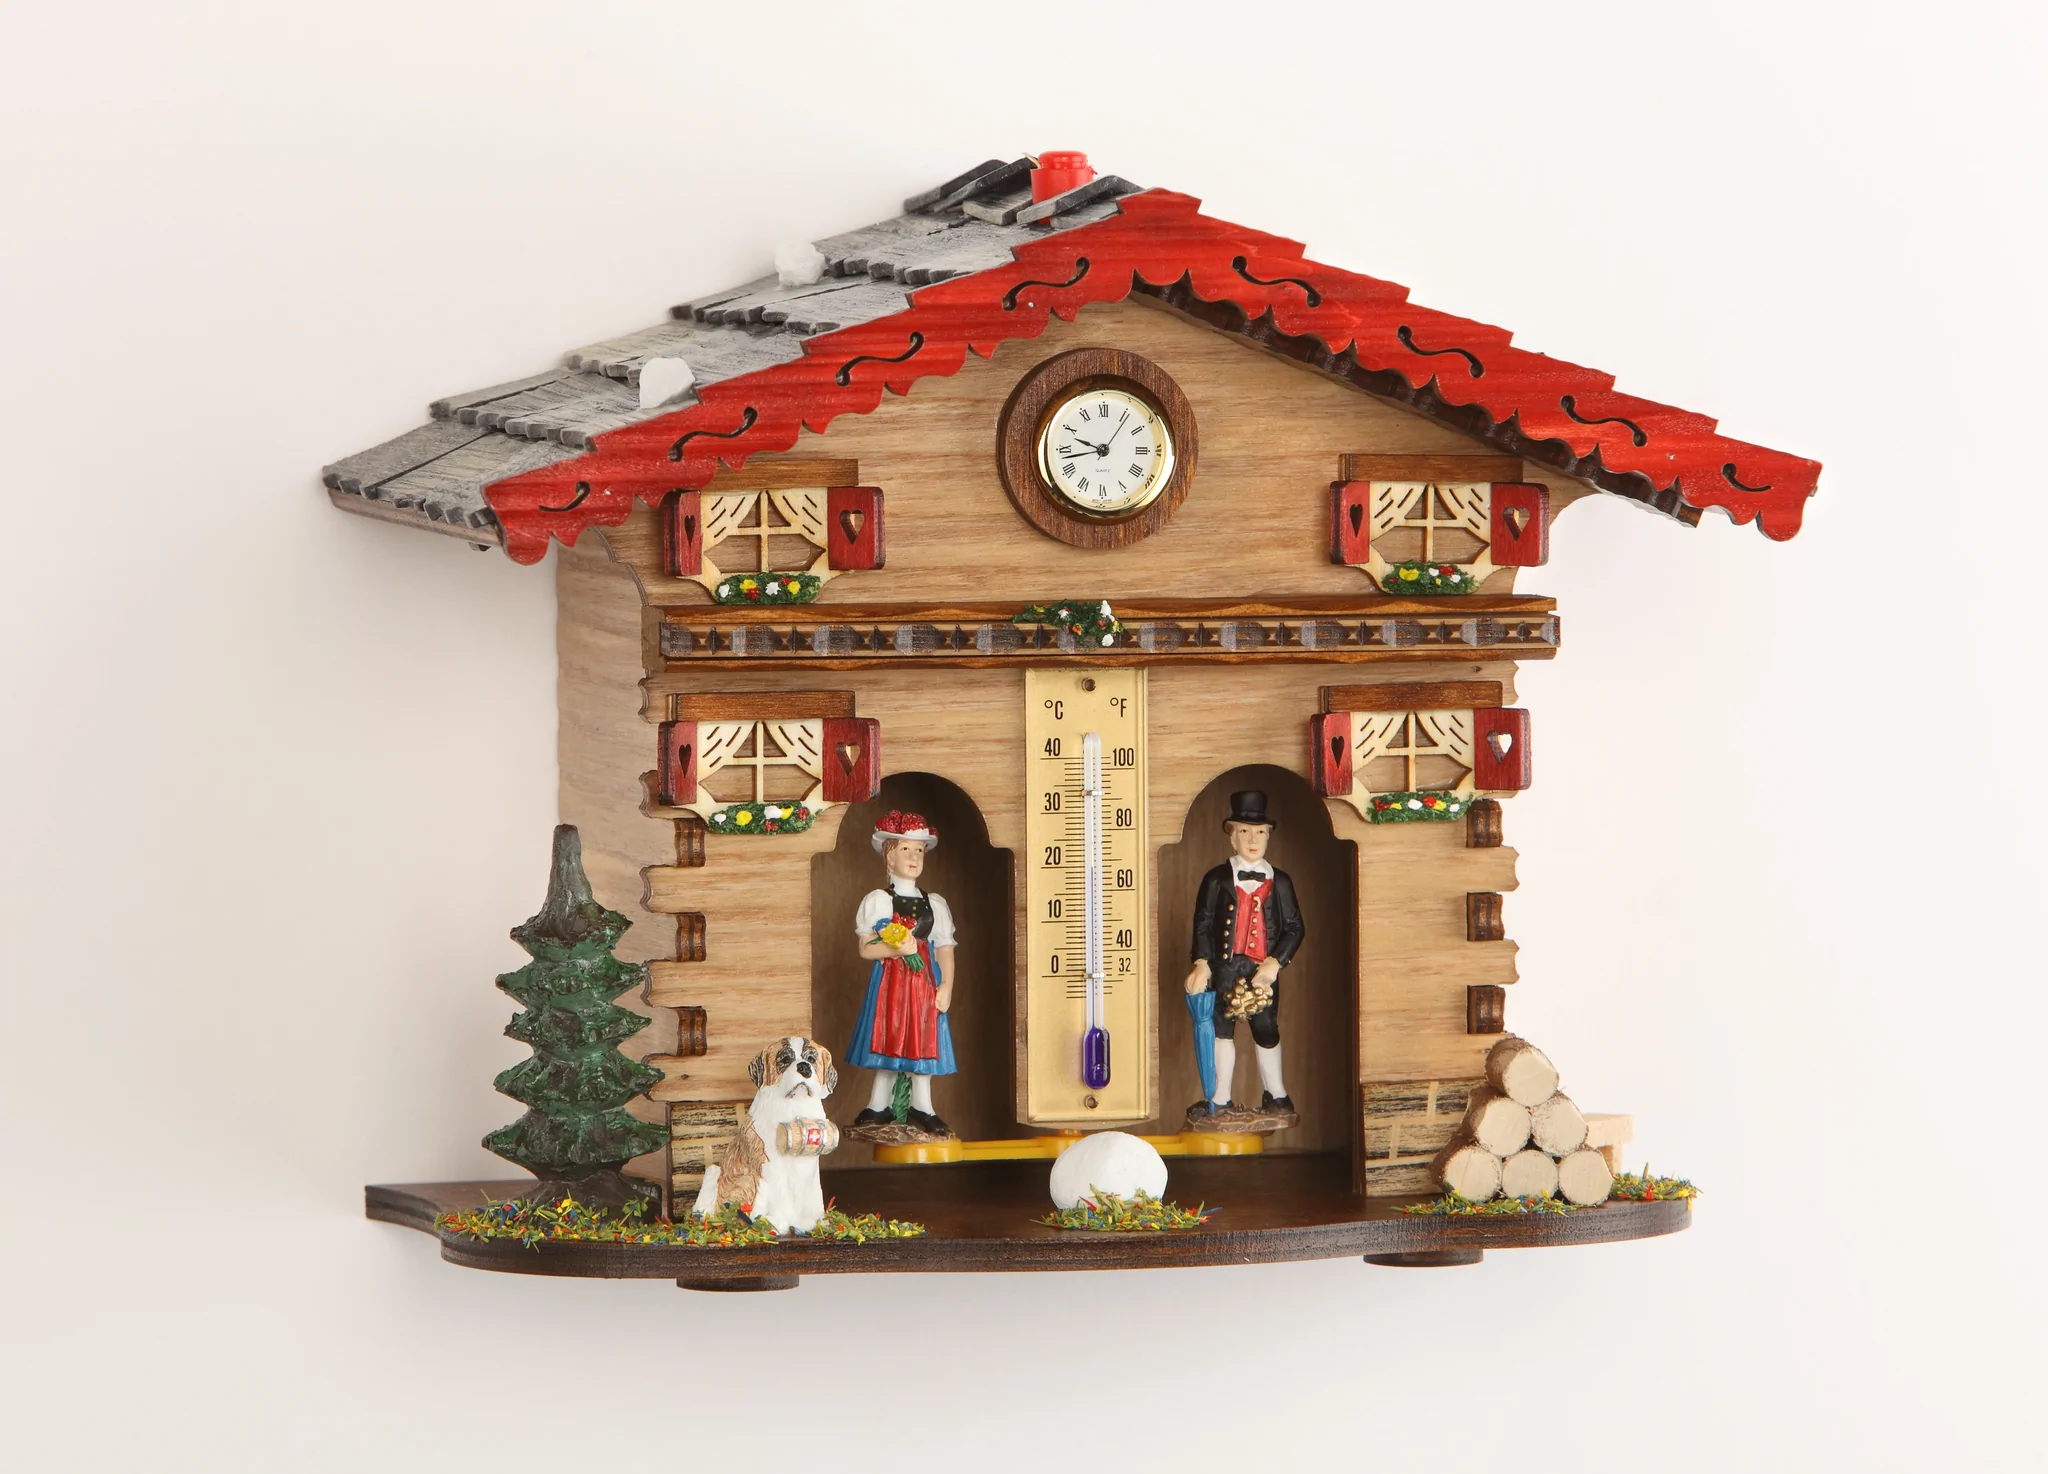 Hermle NUREMBERG, Chalet Style Weather Station with man, woman and dog figurines.  Quartz time only insert